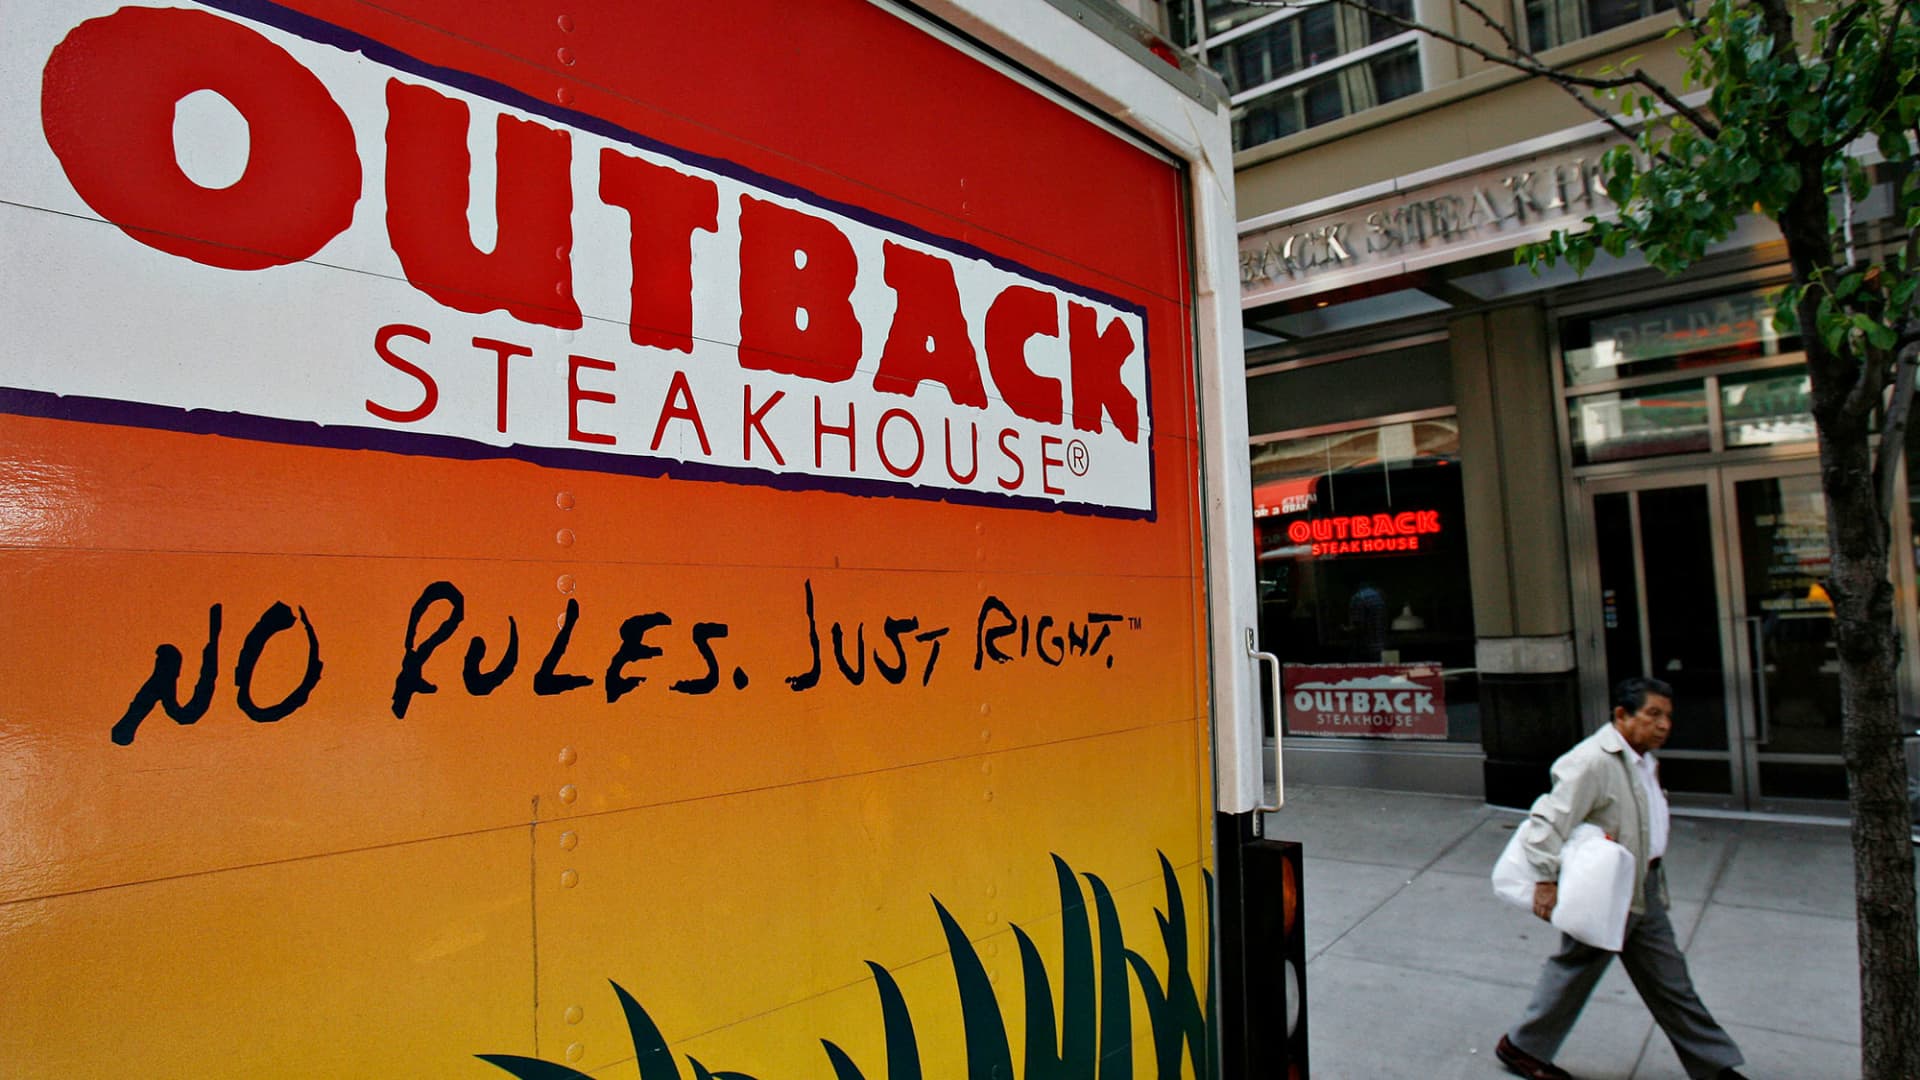 Outback Steakhouse owner’s stock rises after activist Starboard Value buys stake